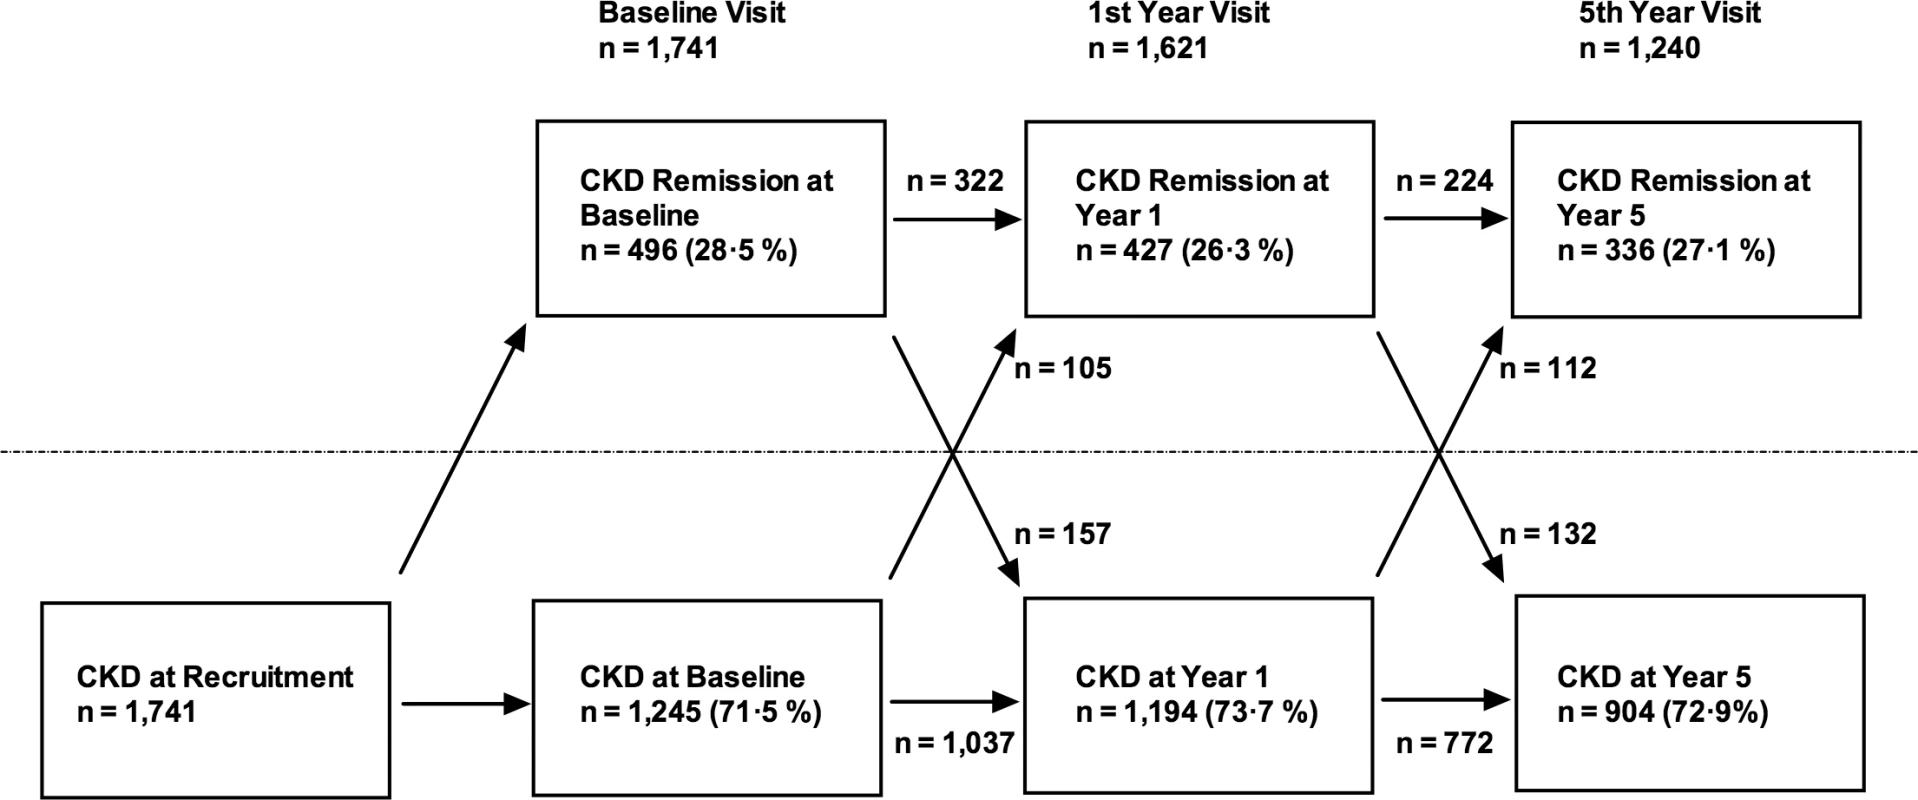 Flowchart showing numbers of participants demonstrating CKD and CKD remission at each study visit.